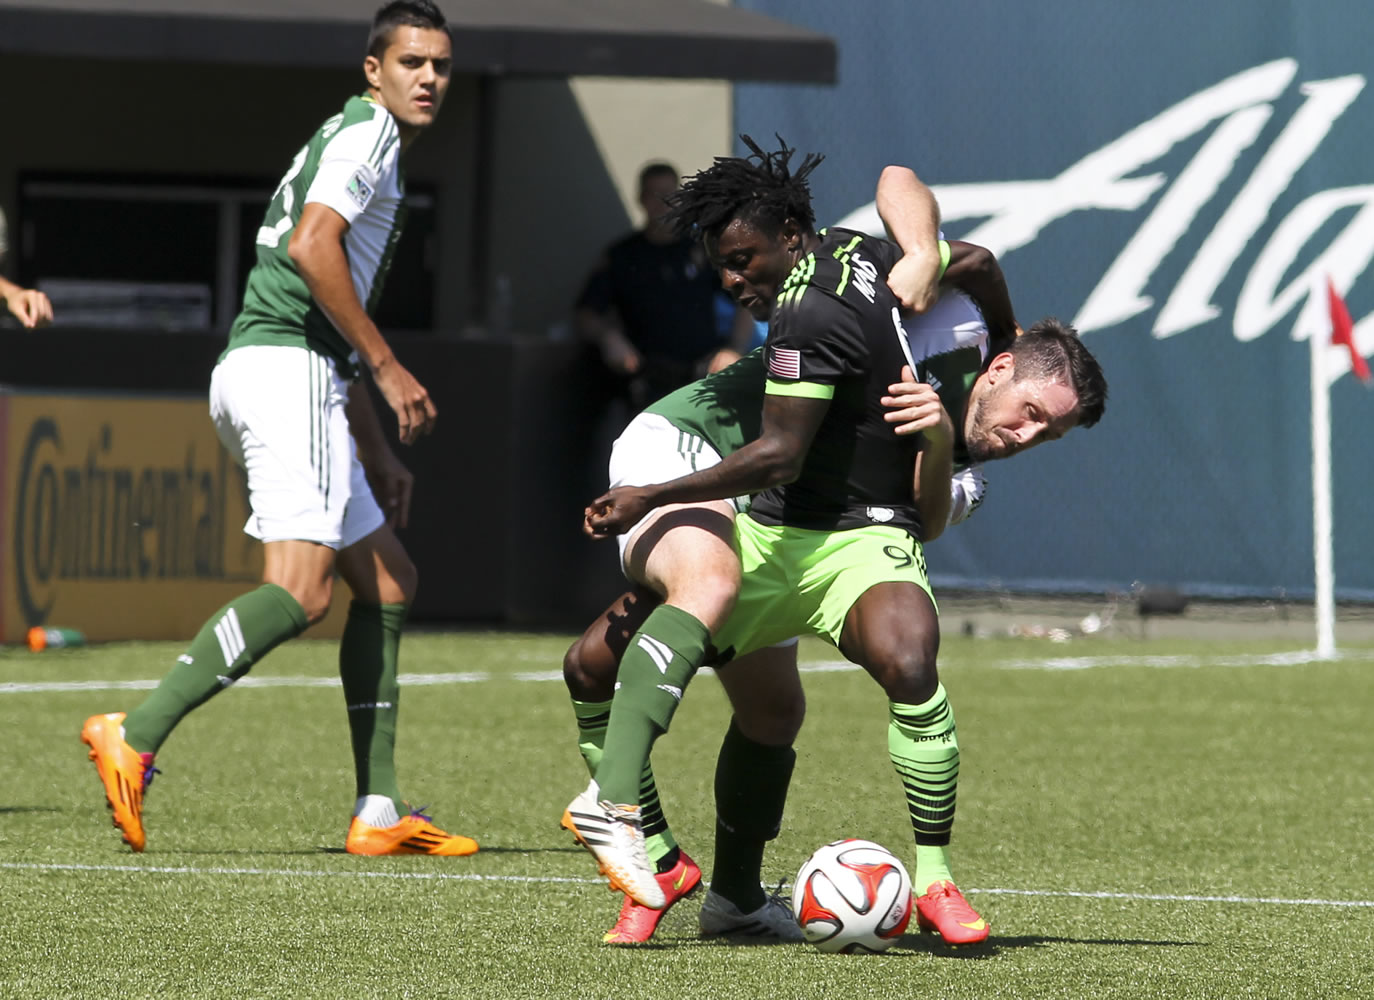 Seattle Sounders player Obafemi Martins, front, vies for the ball against Portland Timbers' Danny O'Rourke Sunday in Portland.